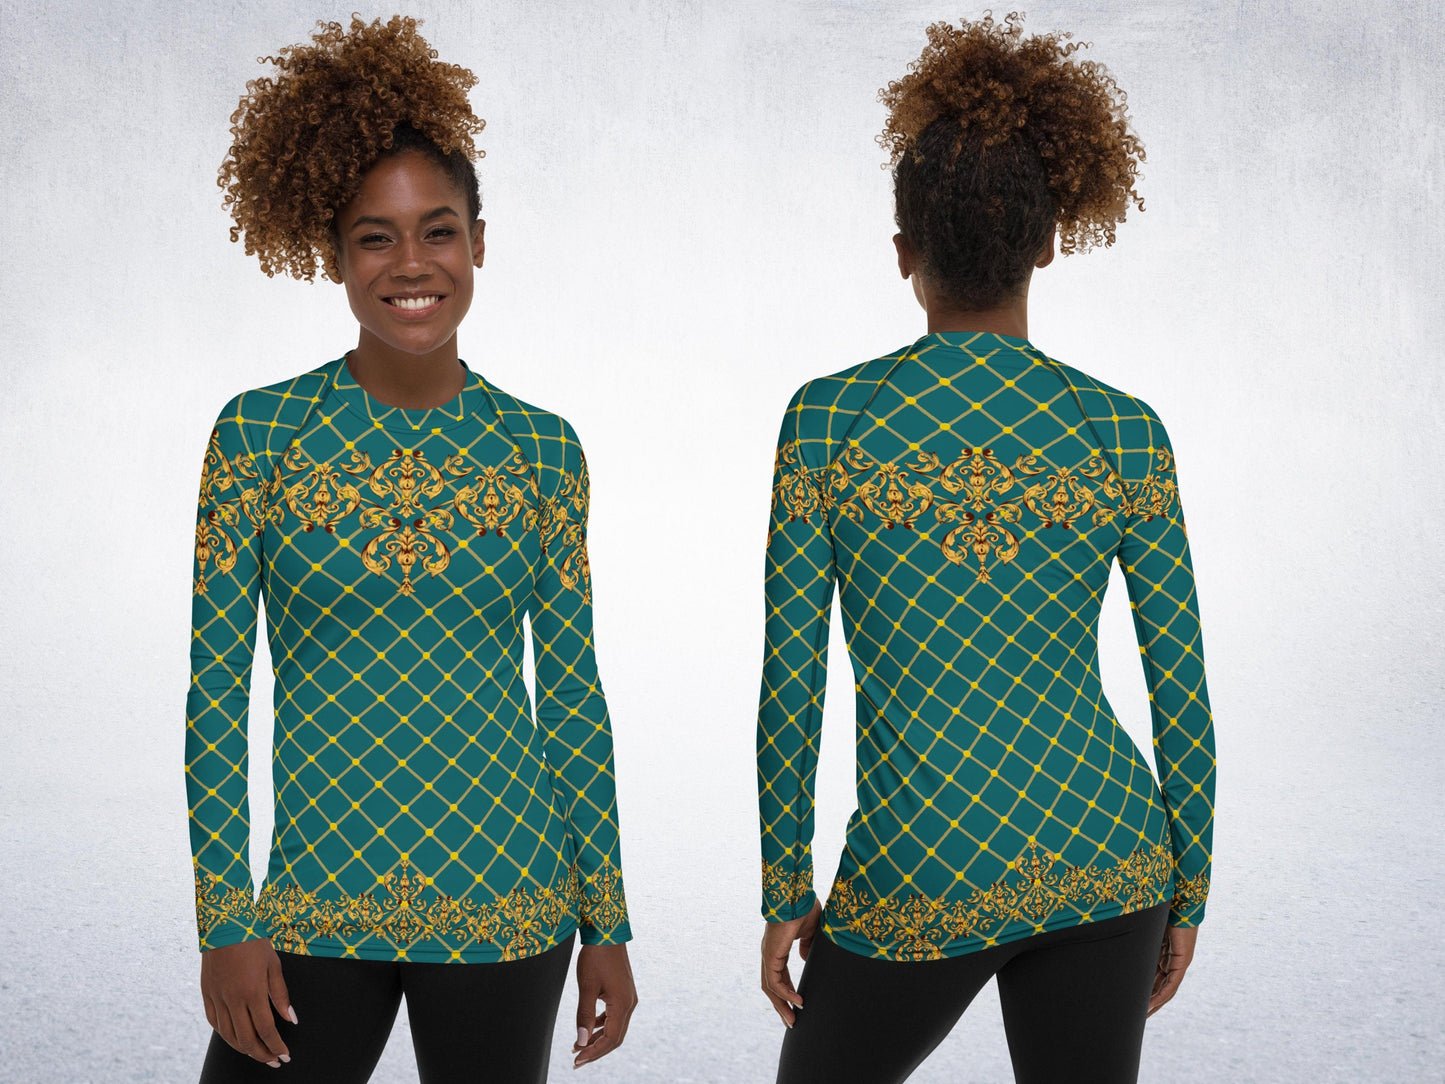 Merida Inspired Rash Guard, Brave, Adult Halloween Costume, Gift for Her, Cosplay Outfit